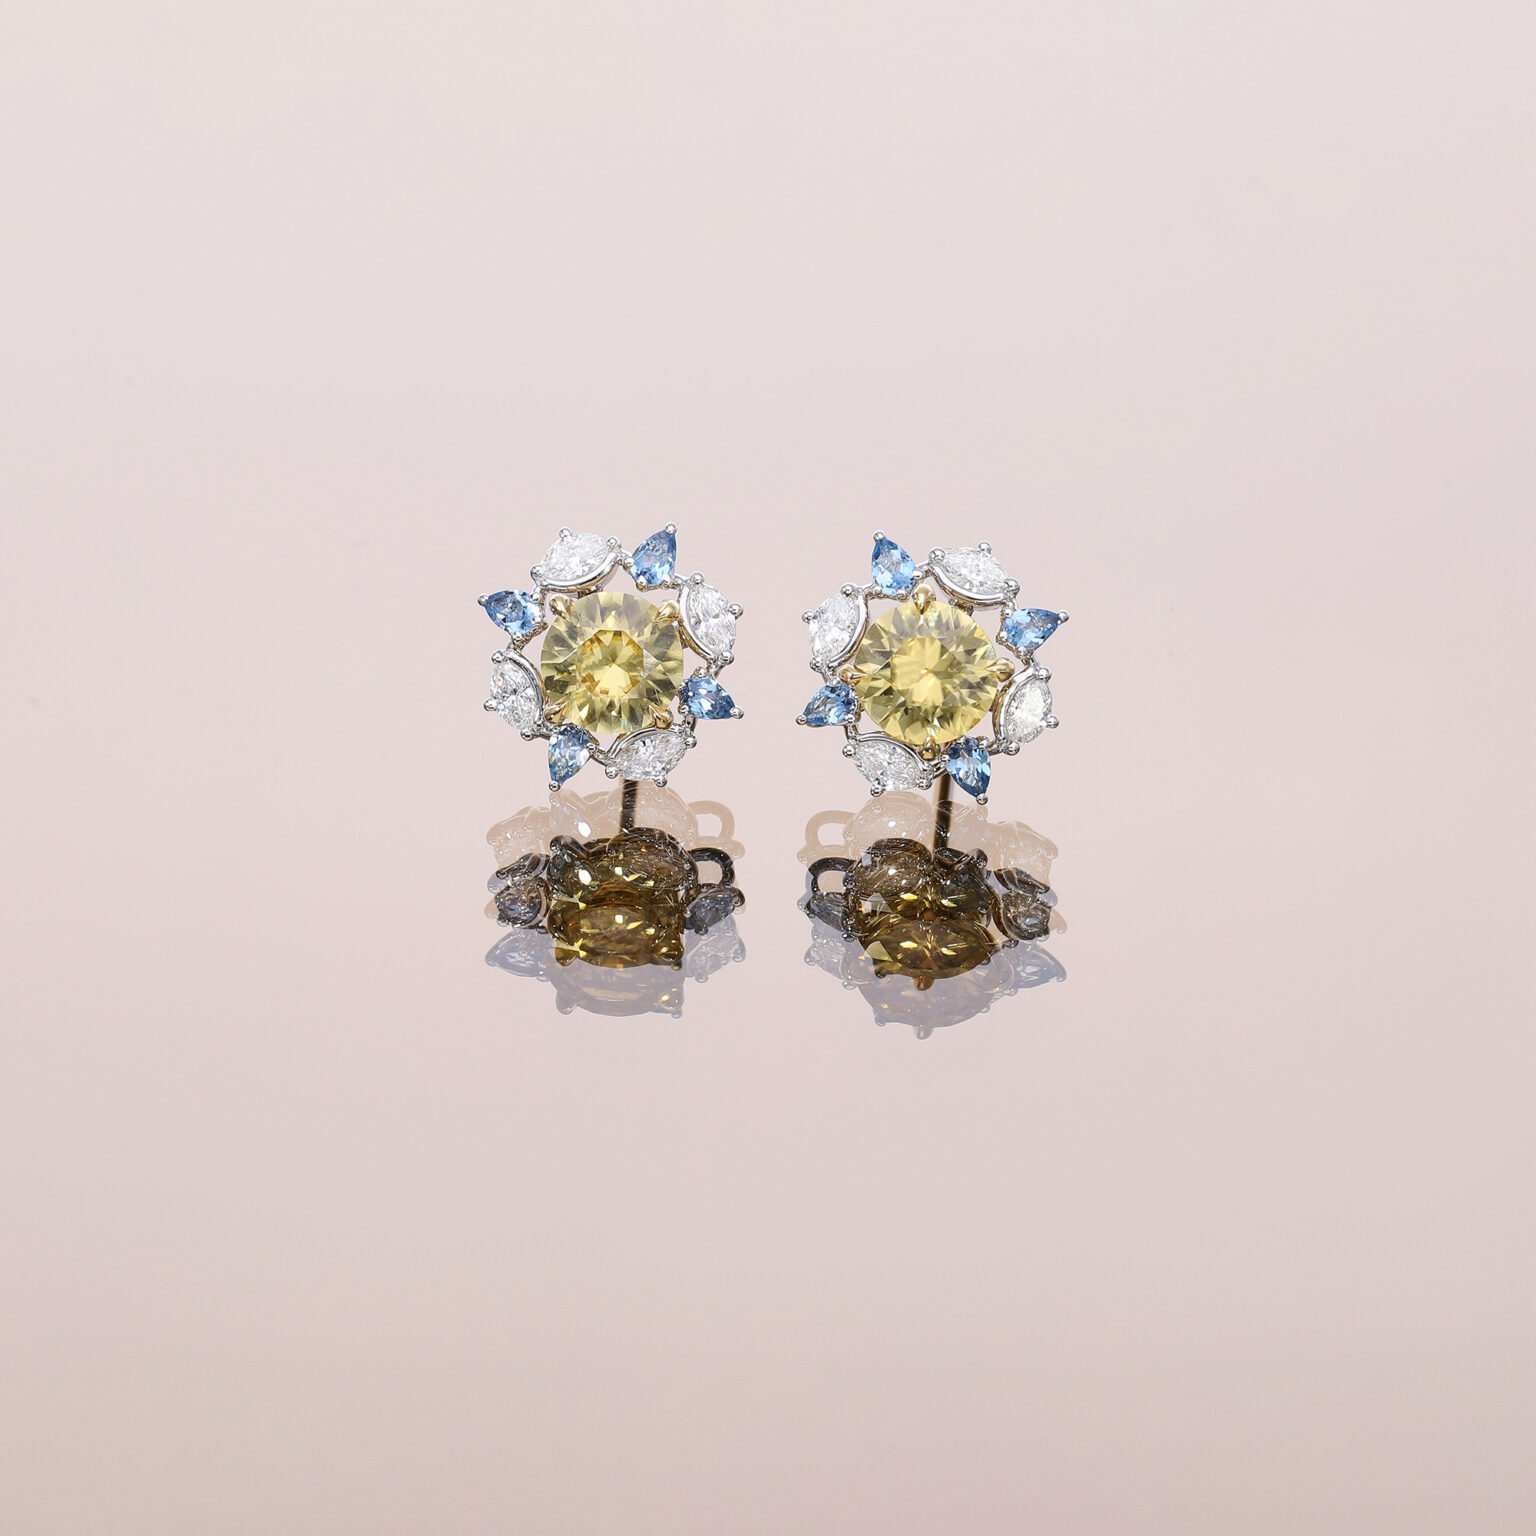 Yellow Zircon Earring Studs with Galaxy Earring Jackets with Aquamarines and Diamonds